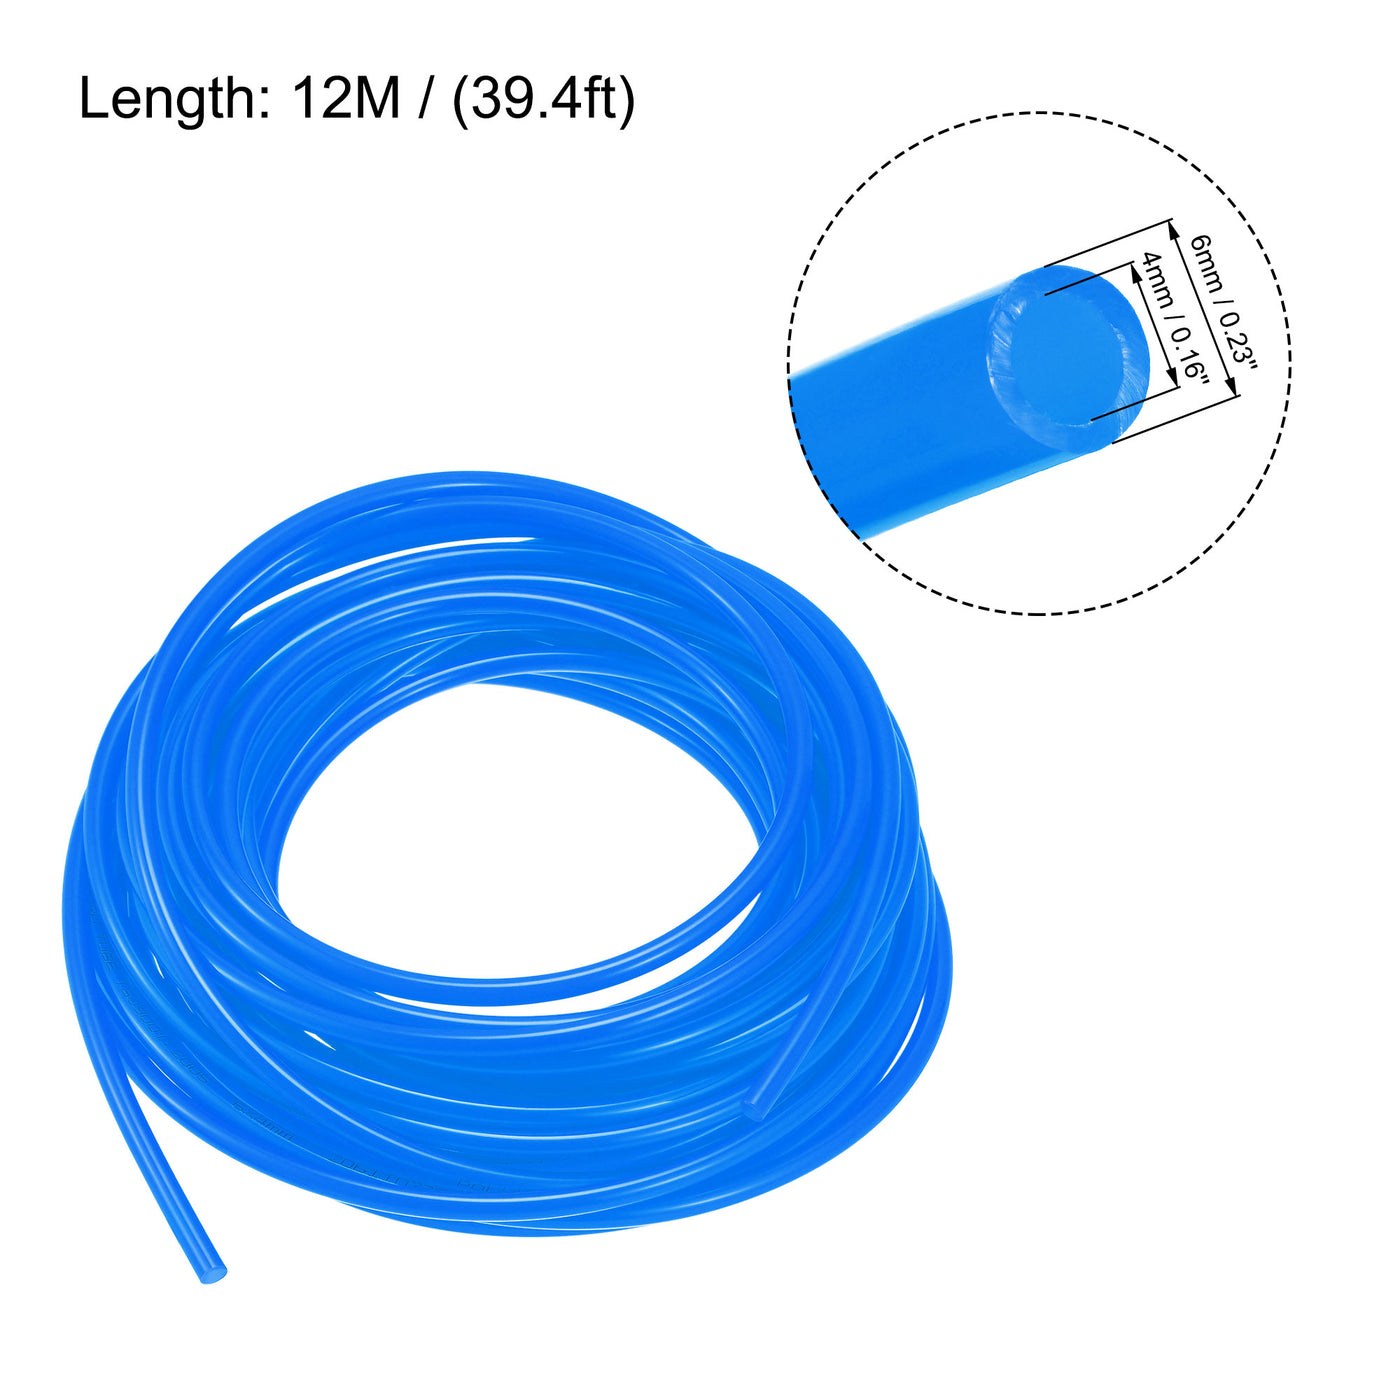 uxcell Uxcell Pneumatic Air Hose Tubing Air Compressor Tube 4mm/0.16''ID x 6mm/0.23''OD x 12m/39.4Ft Polyurethane Pipe Blue